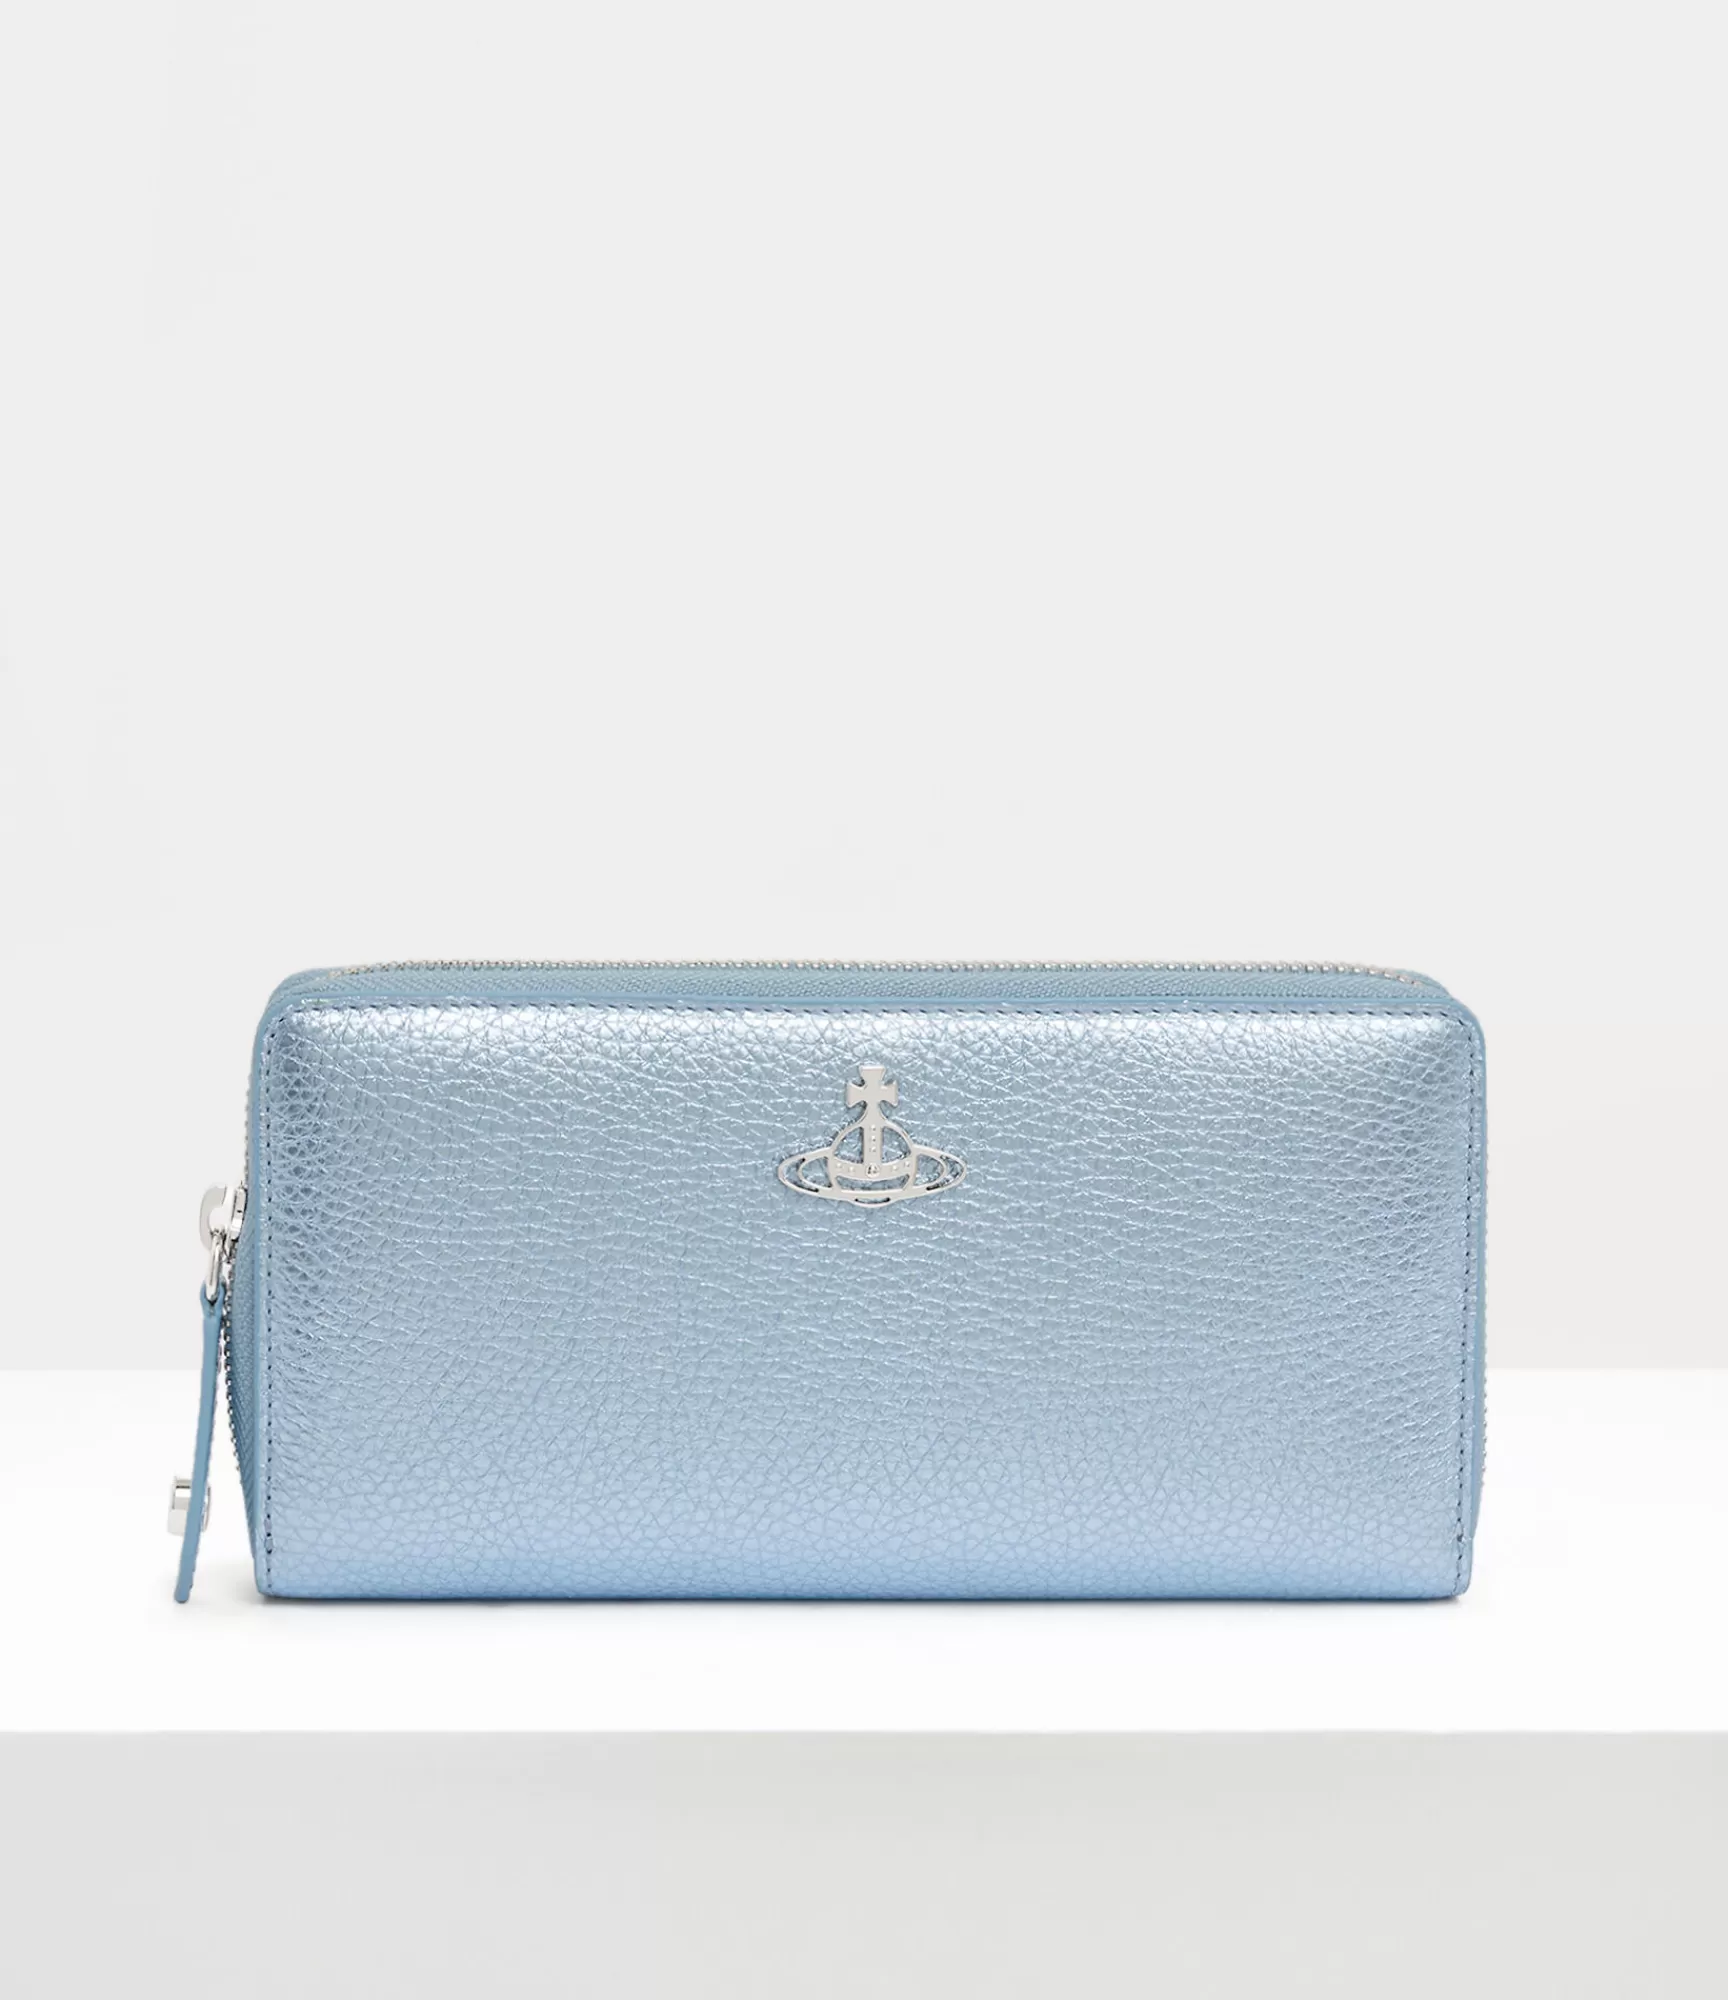 Vivienne Westwood Wallets and Purses*GRAIN LEATHER ZIP ROUND WALLET Light Blue / Silver Hw